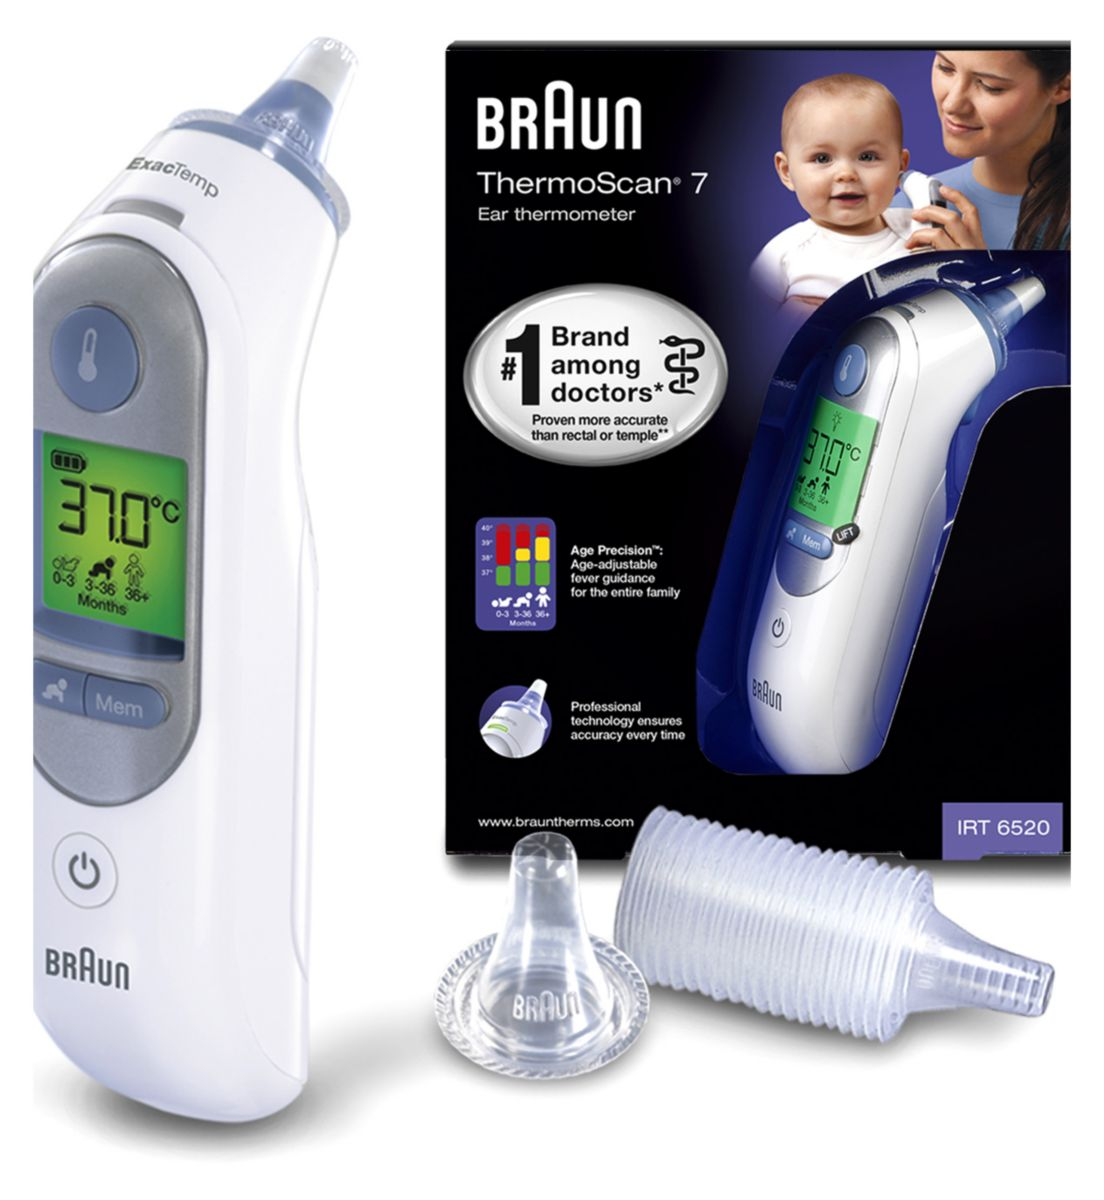 Braun Thermoscan Thermometer 7 With Age Precision